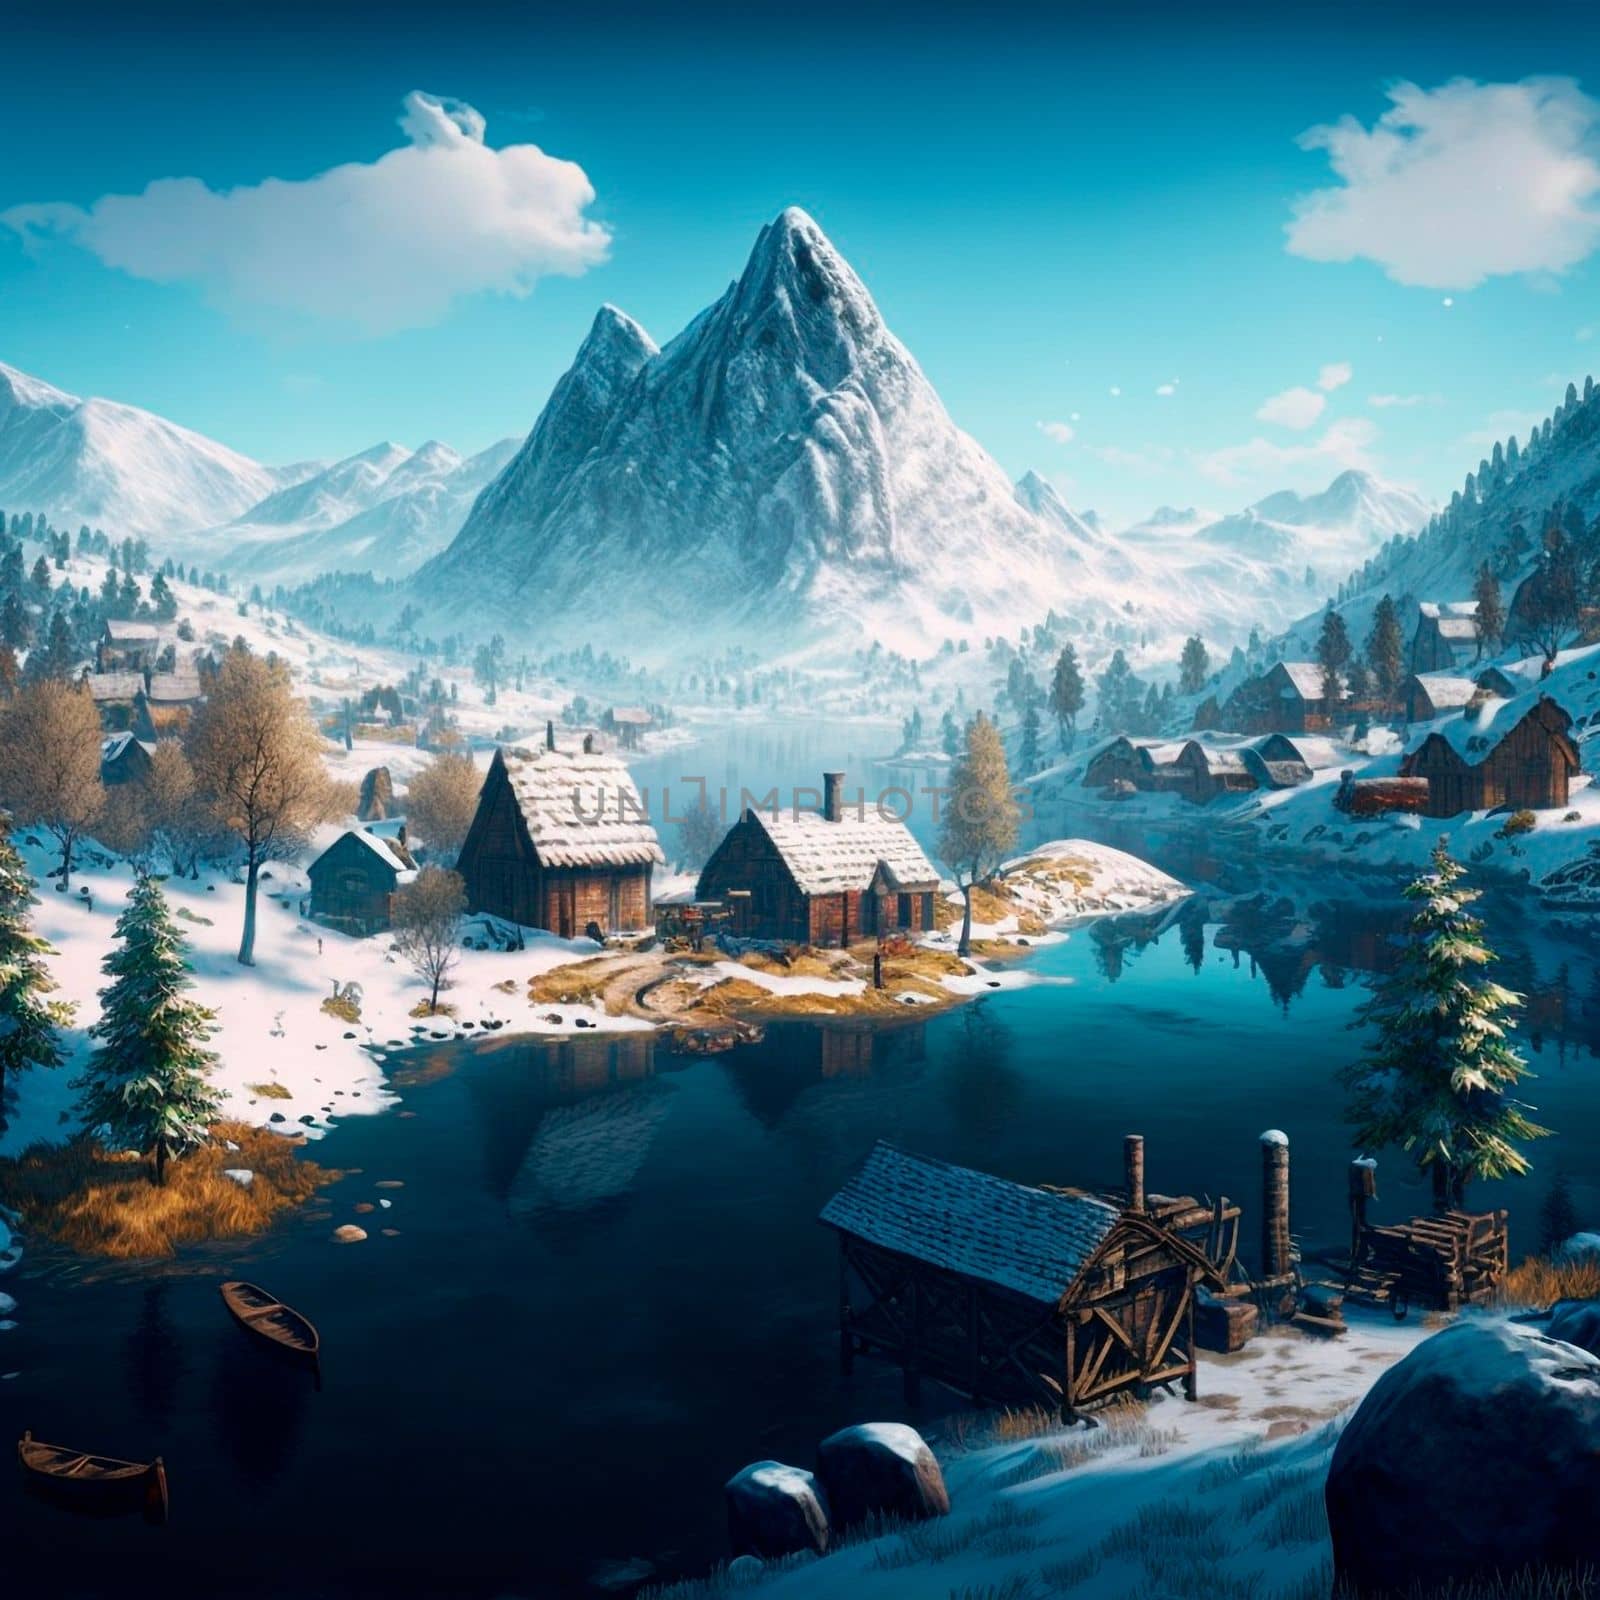 Small village with a river in the snowy mountains. High quality illustration